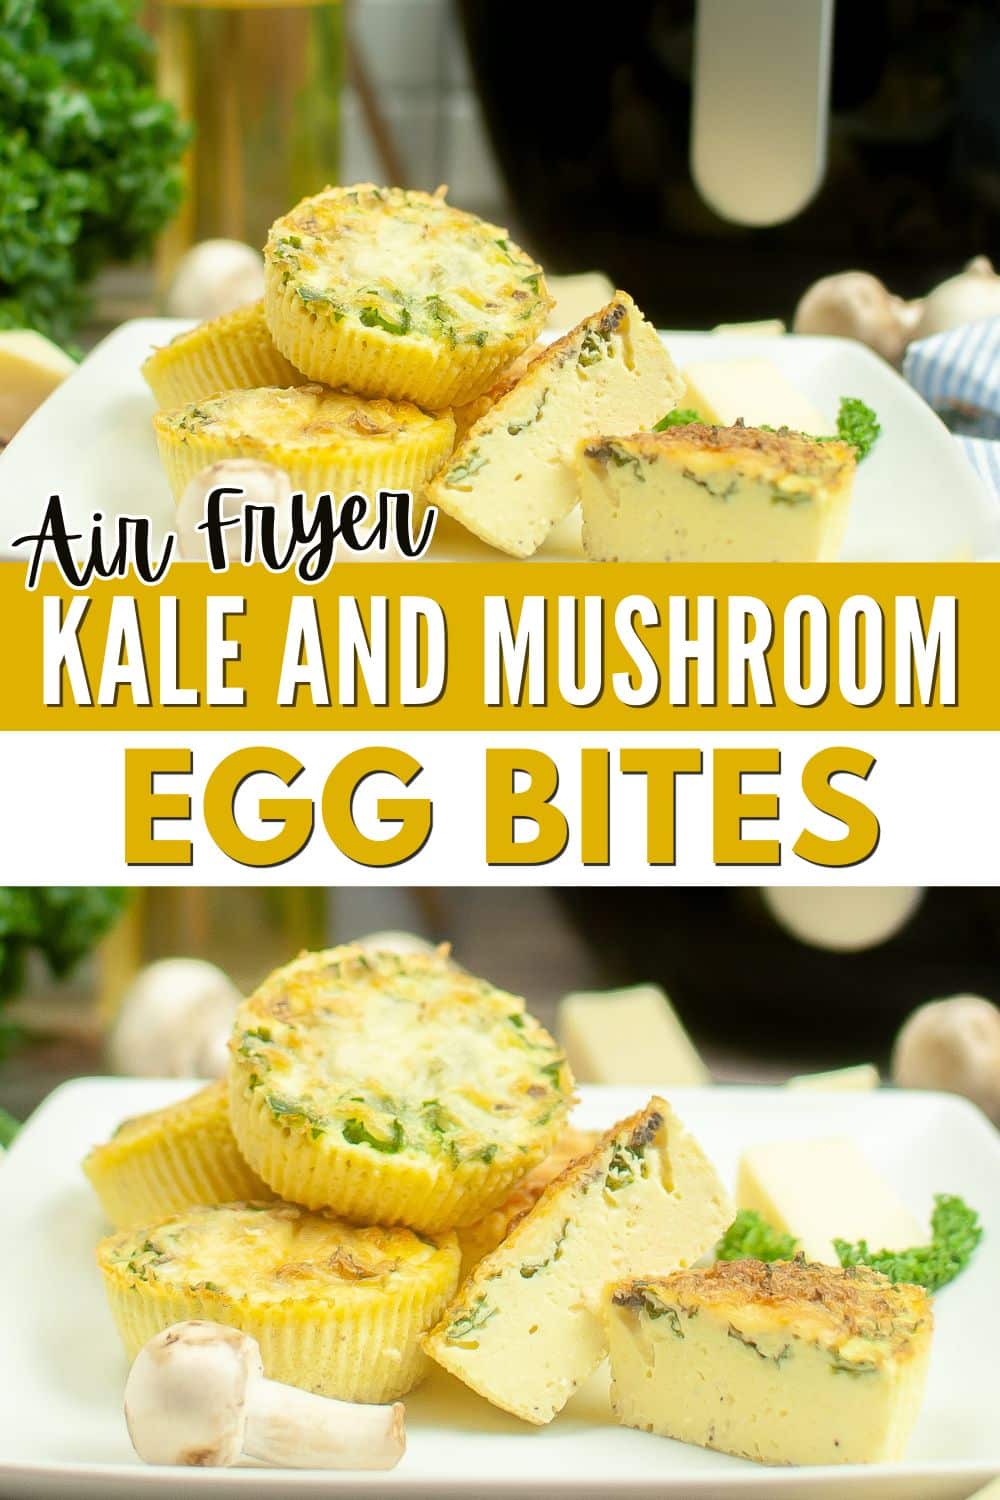 Air fryer kale and mushroom egg bites are a delicious and healthy option for breakfast or brunch.